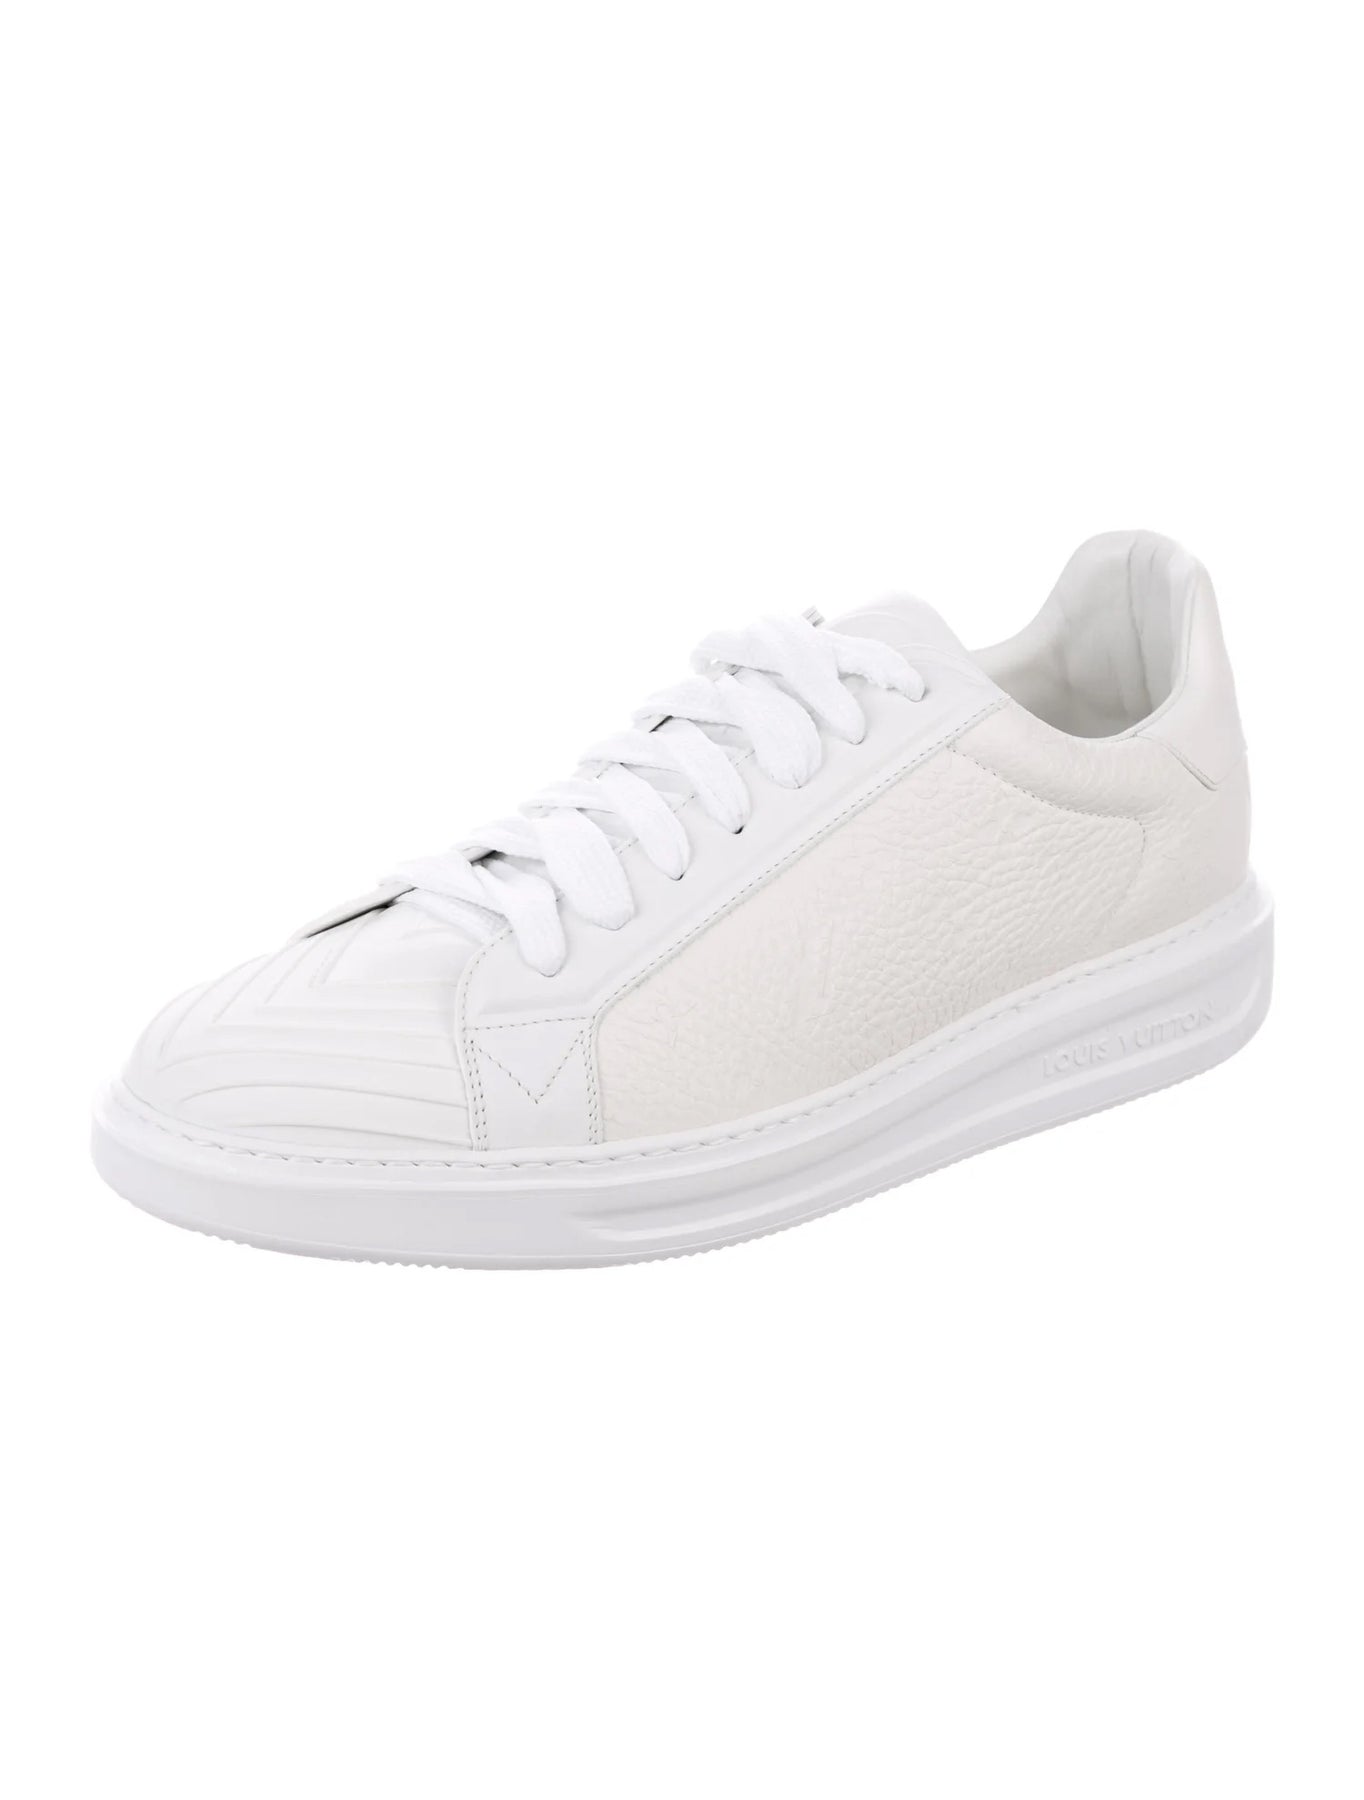 Louis Vuitton Monogram Leather Low Top Sneakers